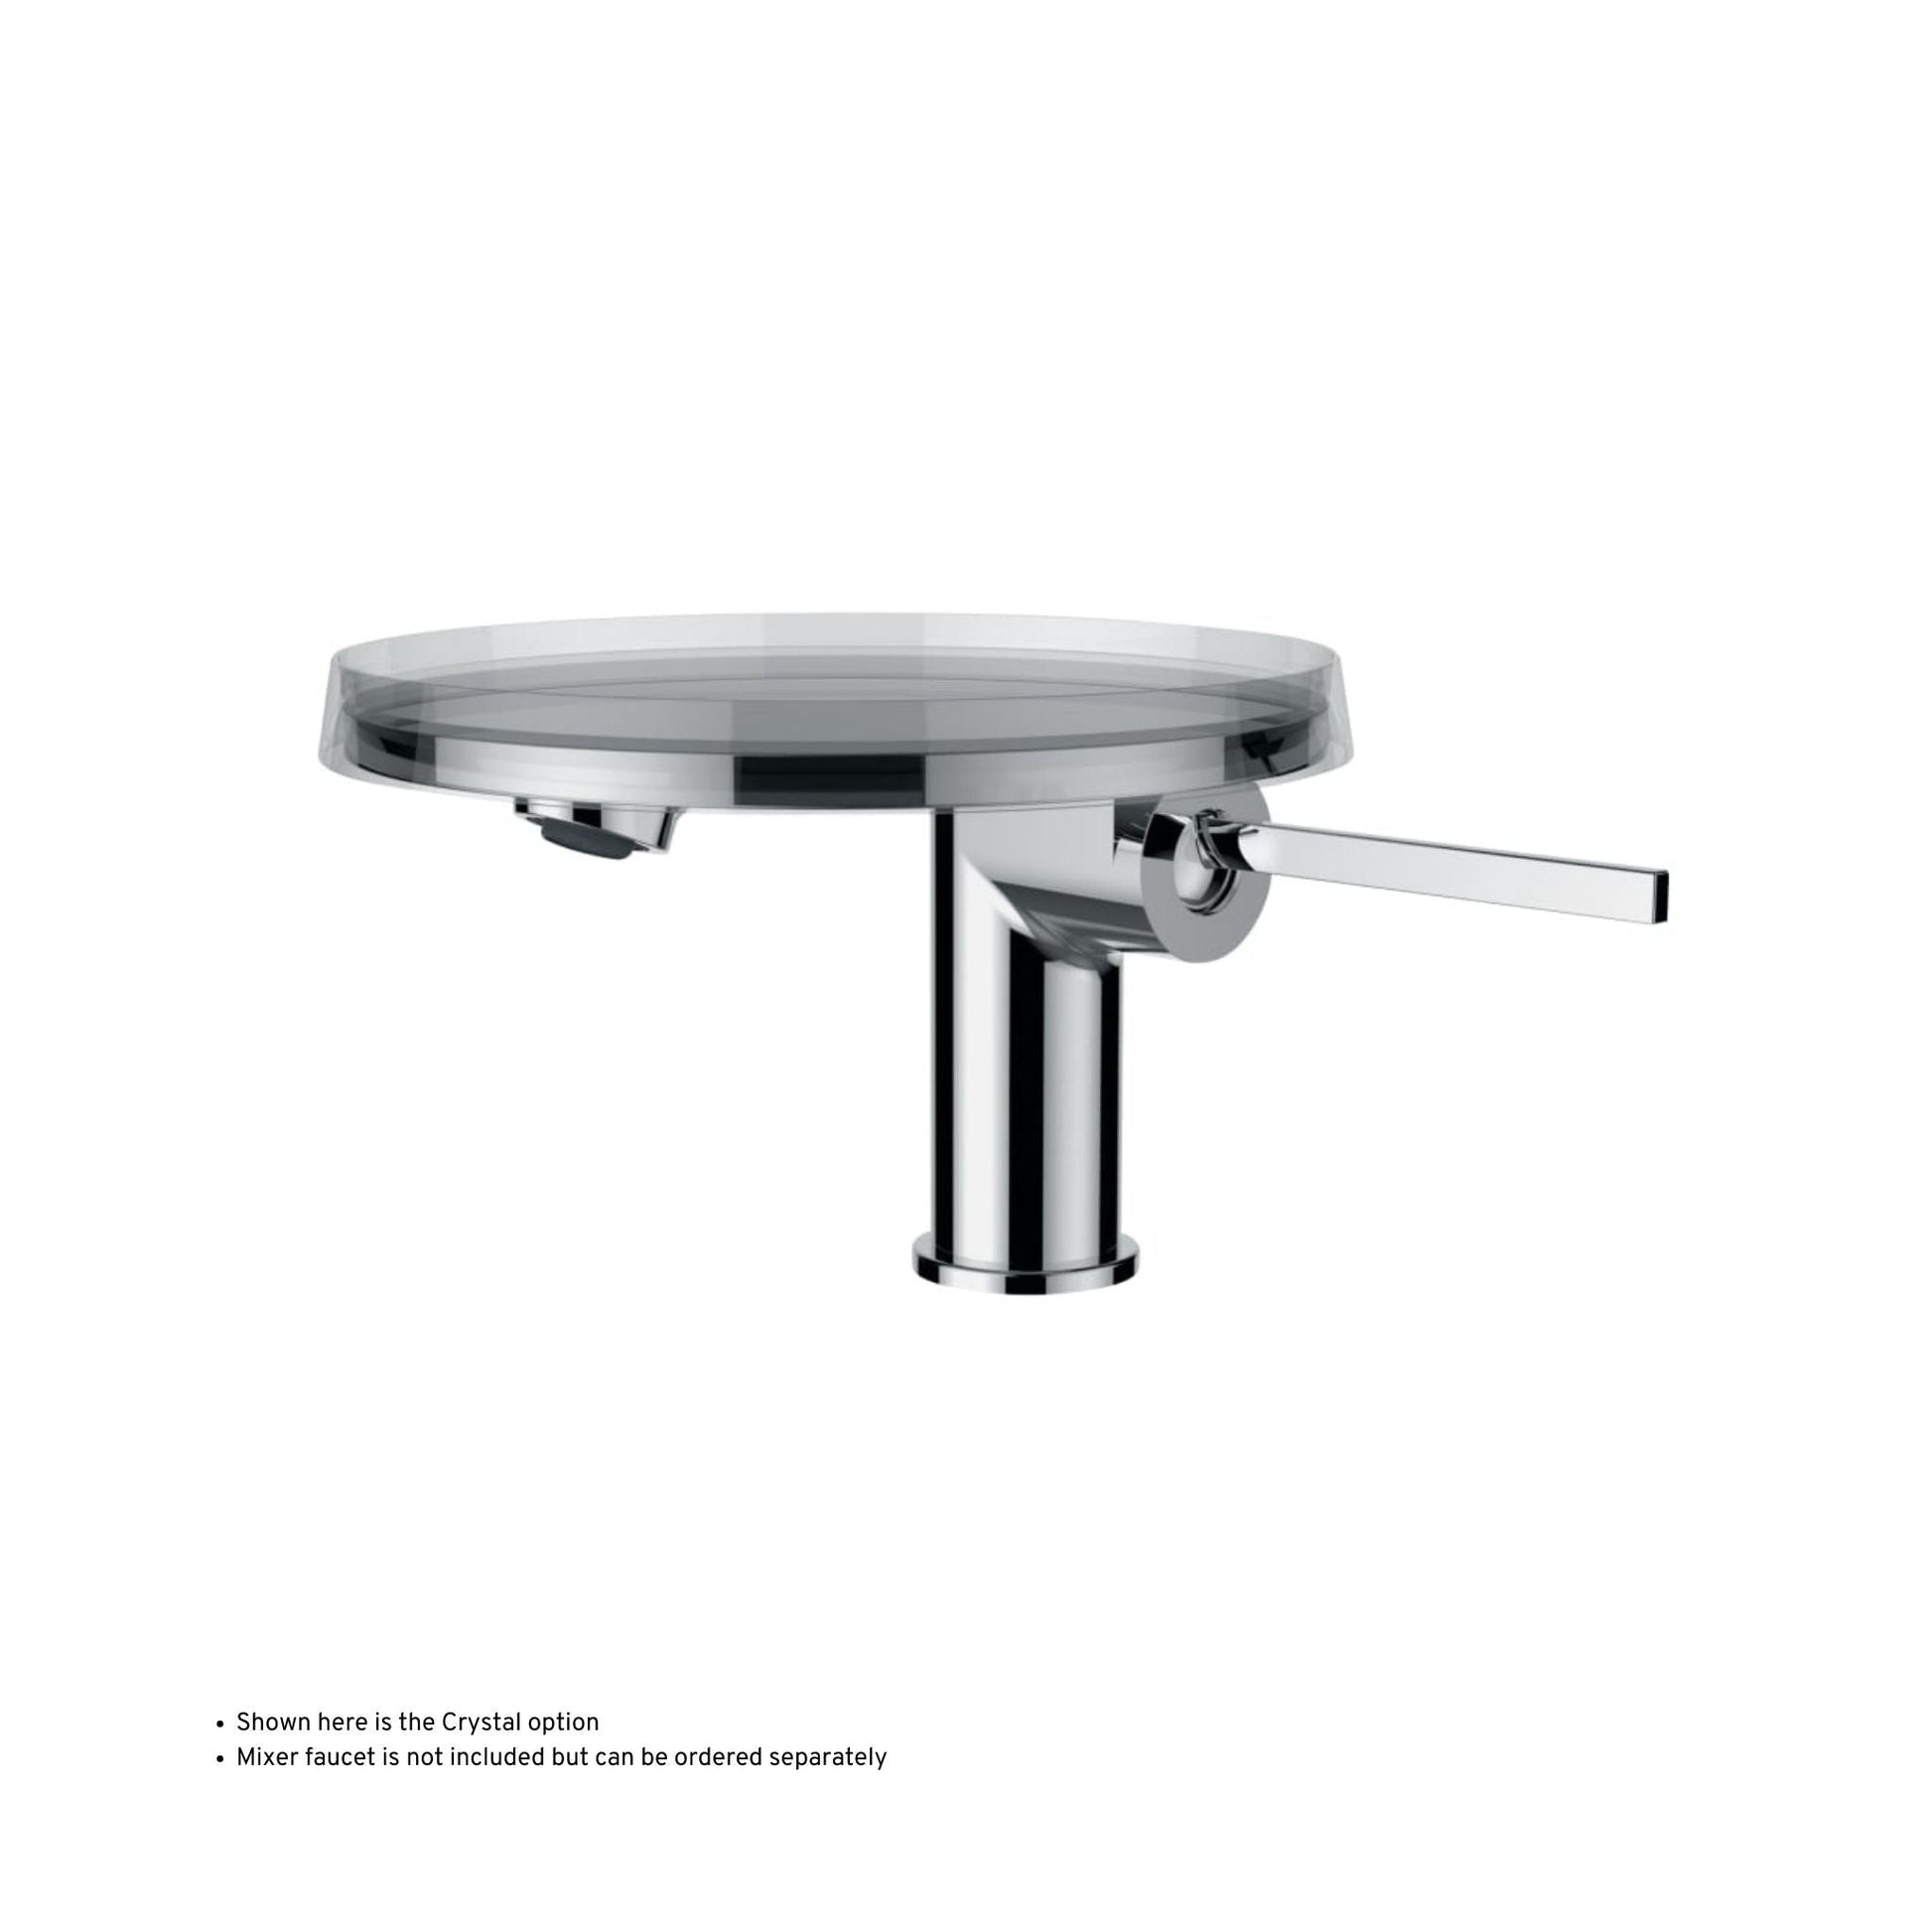 Laufen Kartell 7" Emerald Green Disc Tray for Toilet Paper Holders, Faucets, and Wall-Mounted Trays